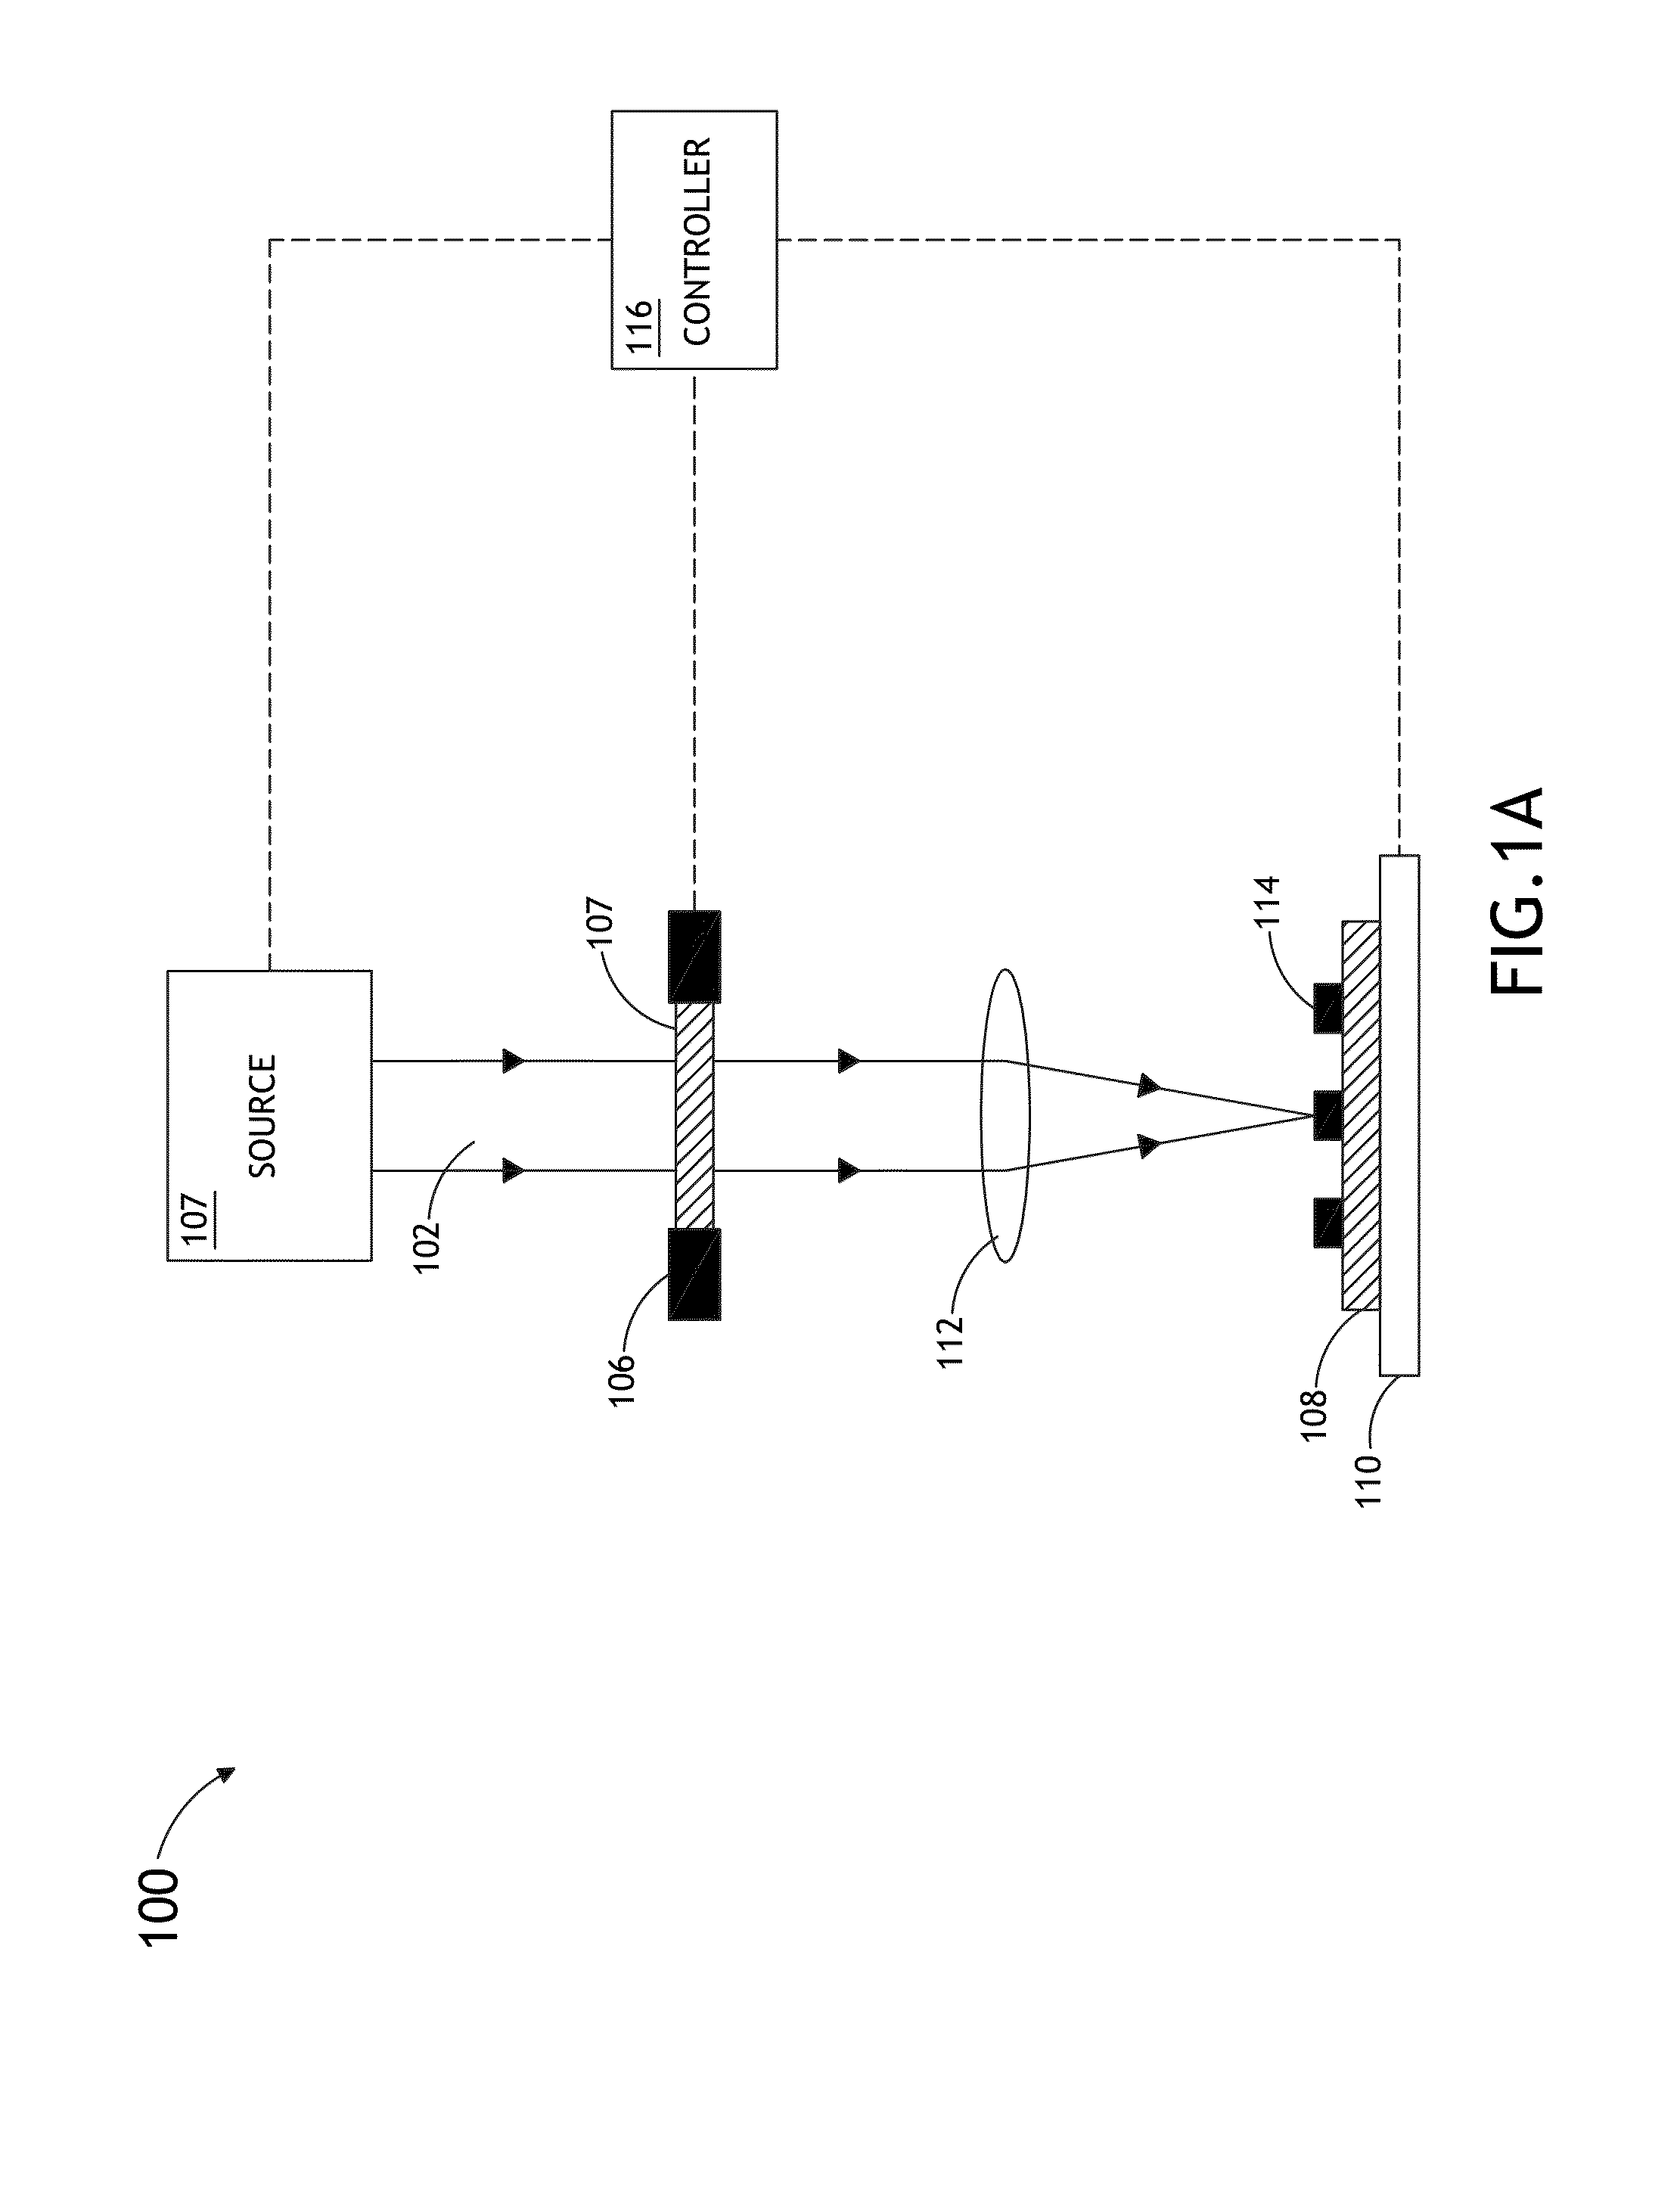 Method and System for Providing a Target Design Displaying High Sensitivity to Scanner Focus Change